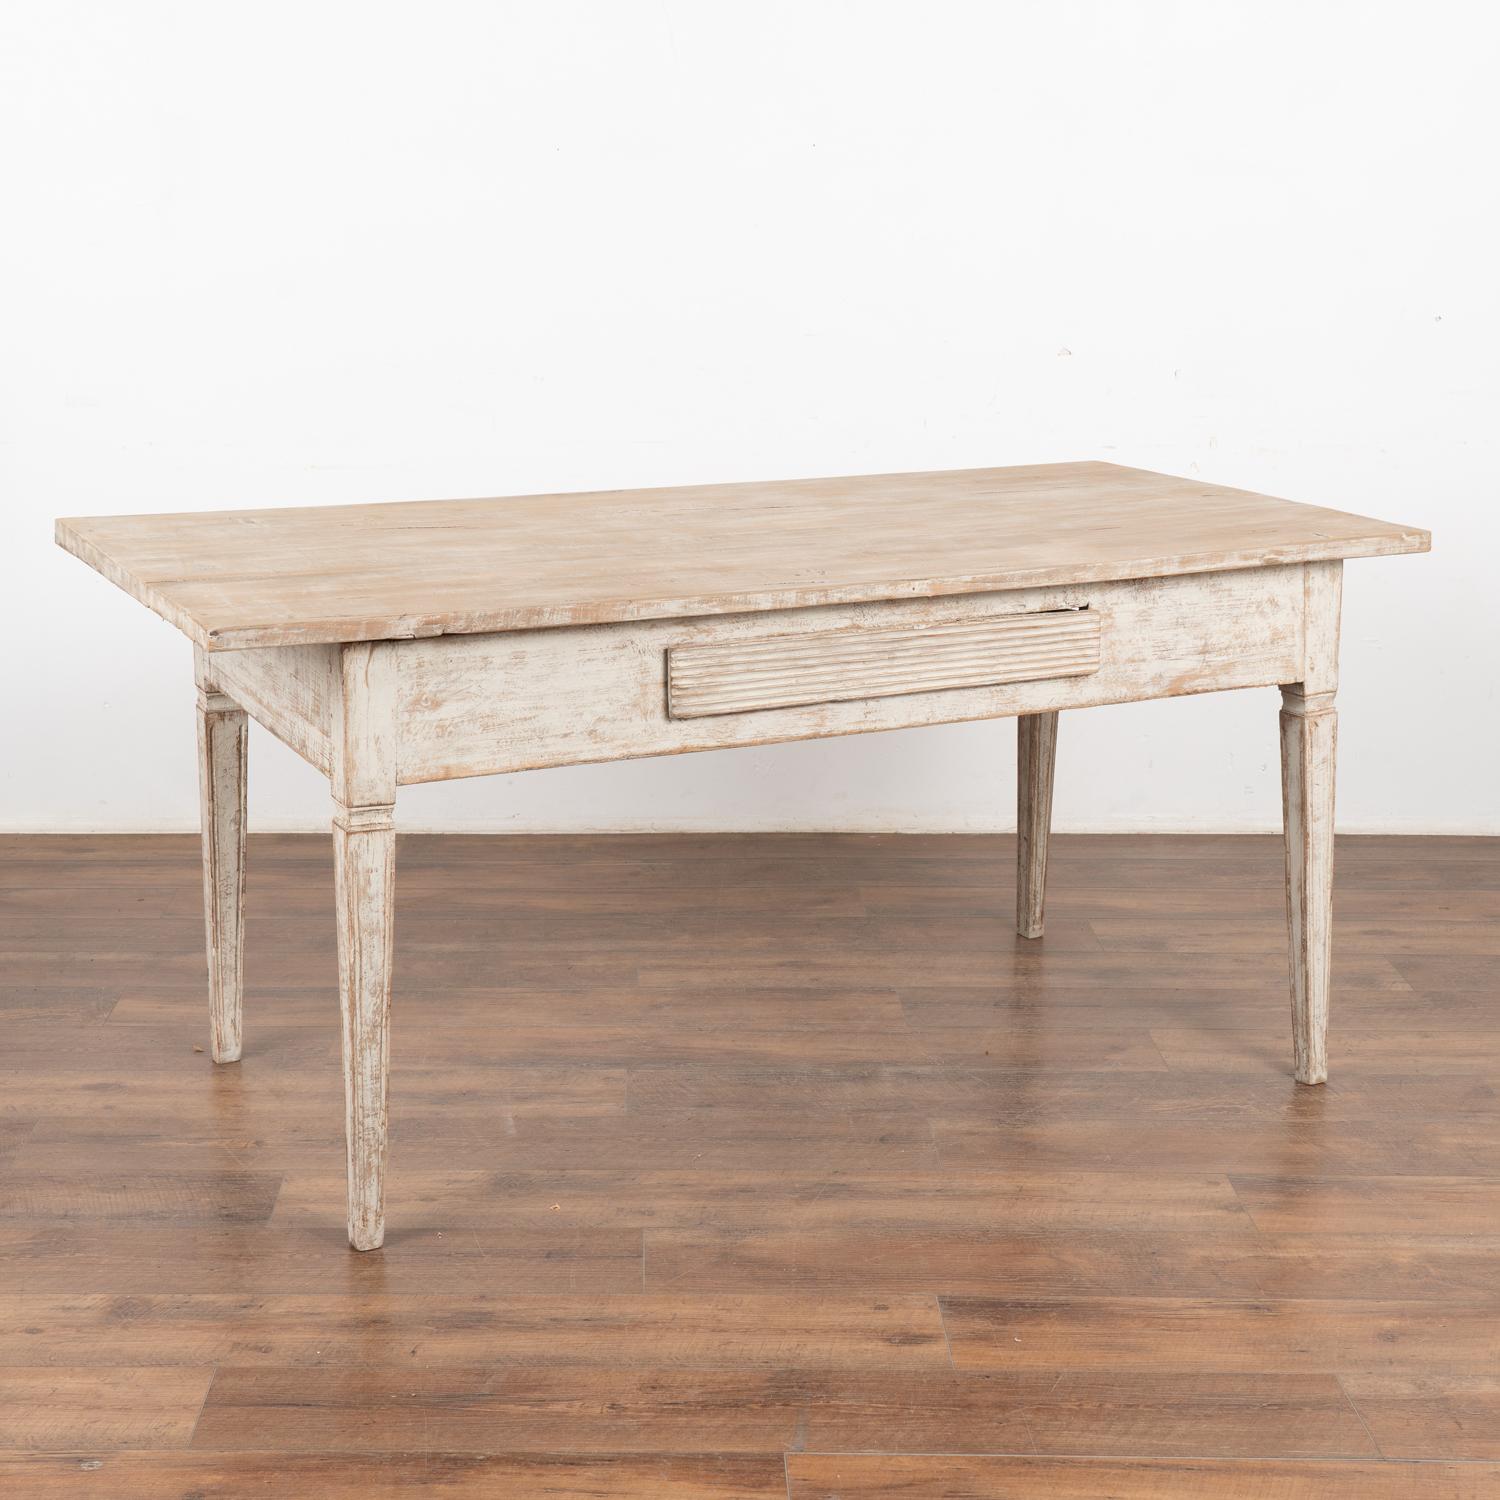 Swedish Gustavian style table with single fluted drawer and tapered legs.
Restored, later professionally painted in layered shades of white now distressed to add to the character and grace of this table that may also serve as a writing desk. 
All